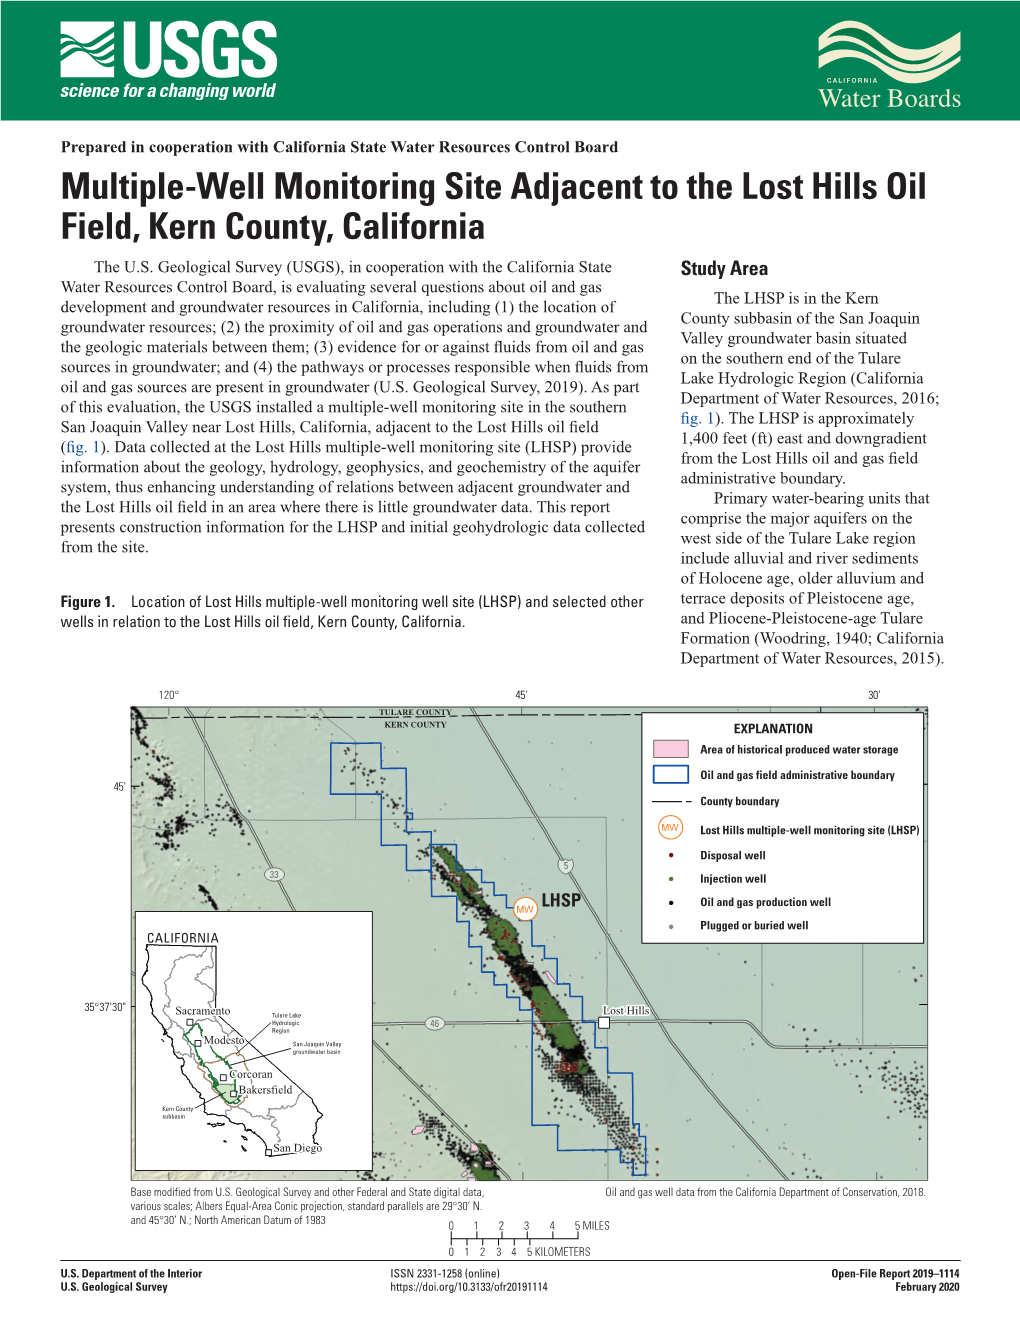 OFR 2019–1114: Multiple-Well Monitoring Site Adjacent to the Lost